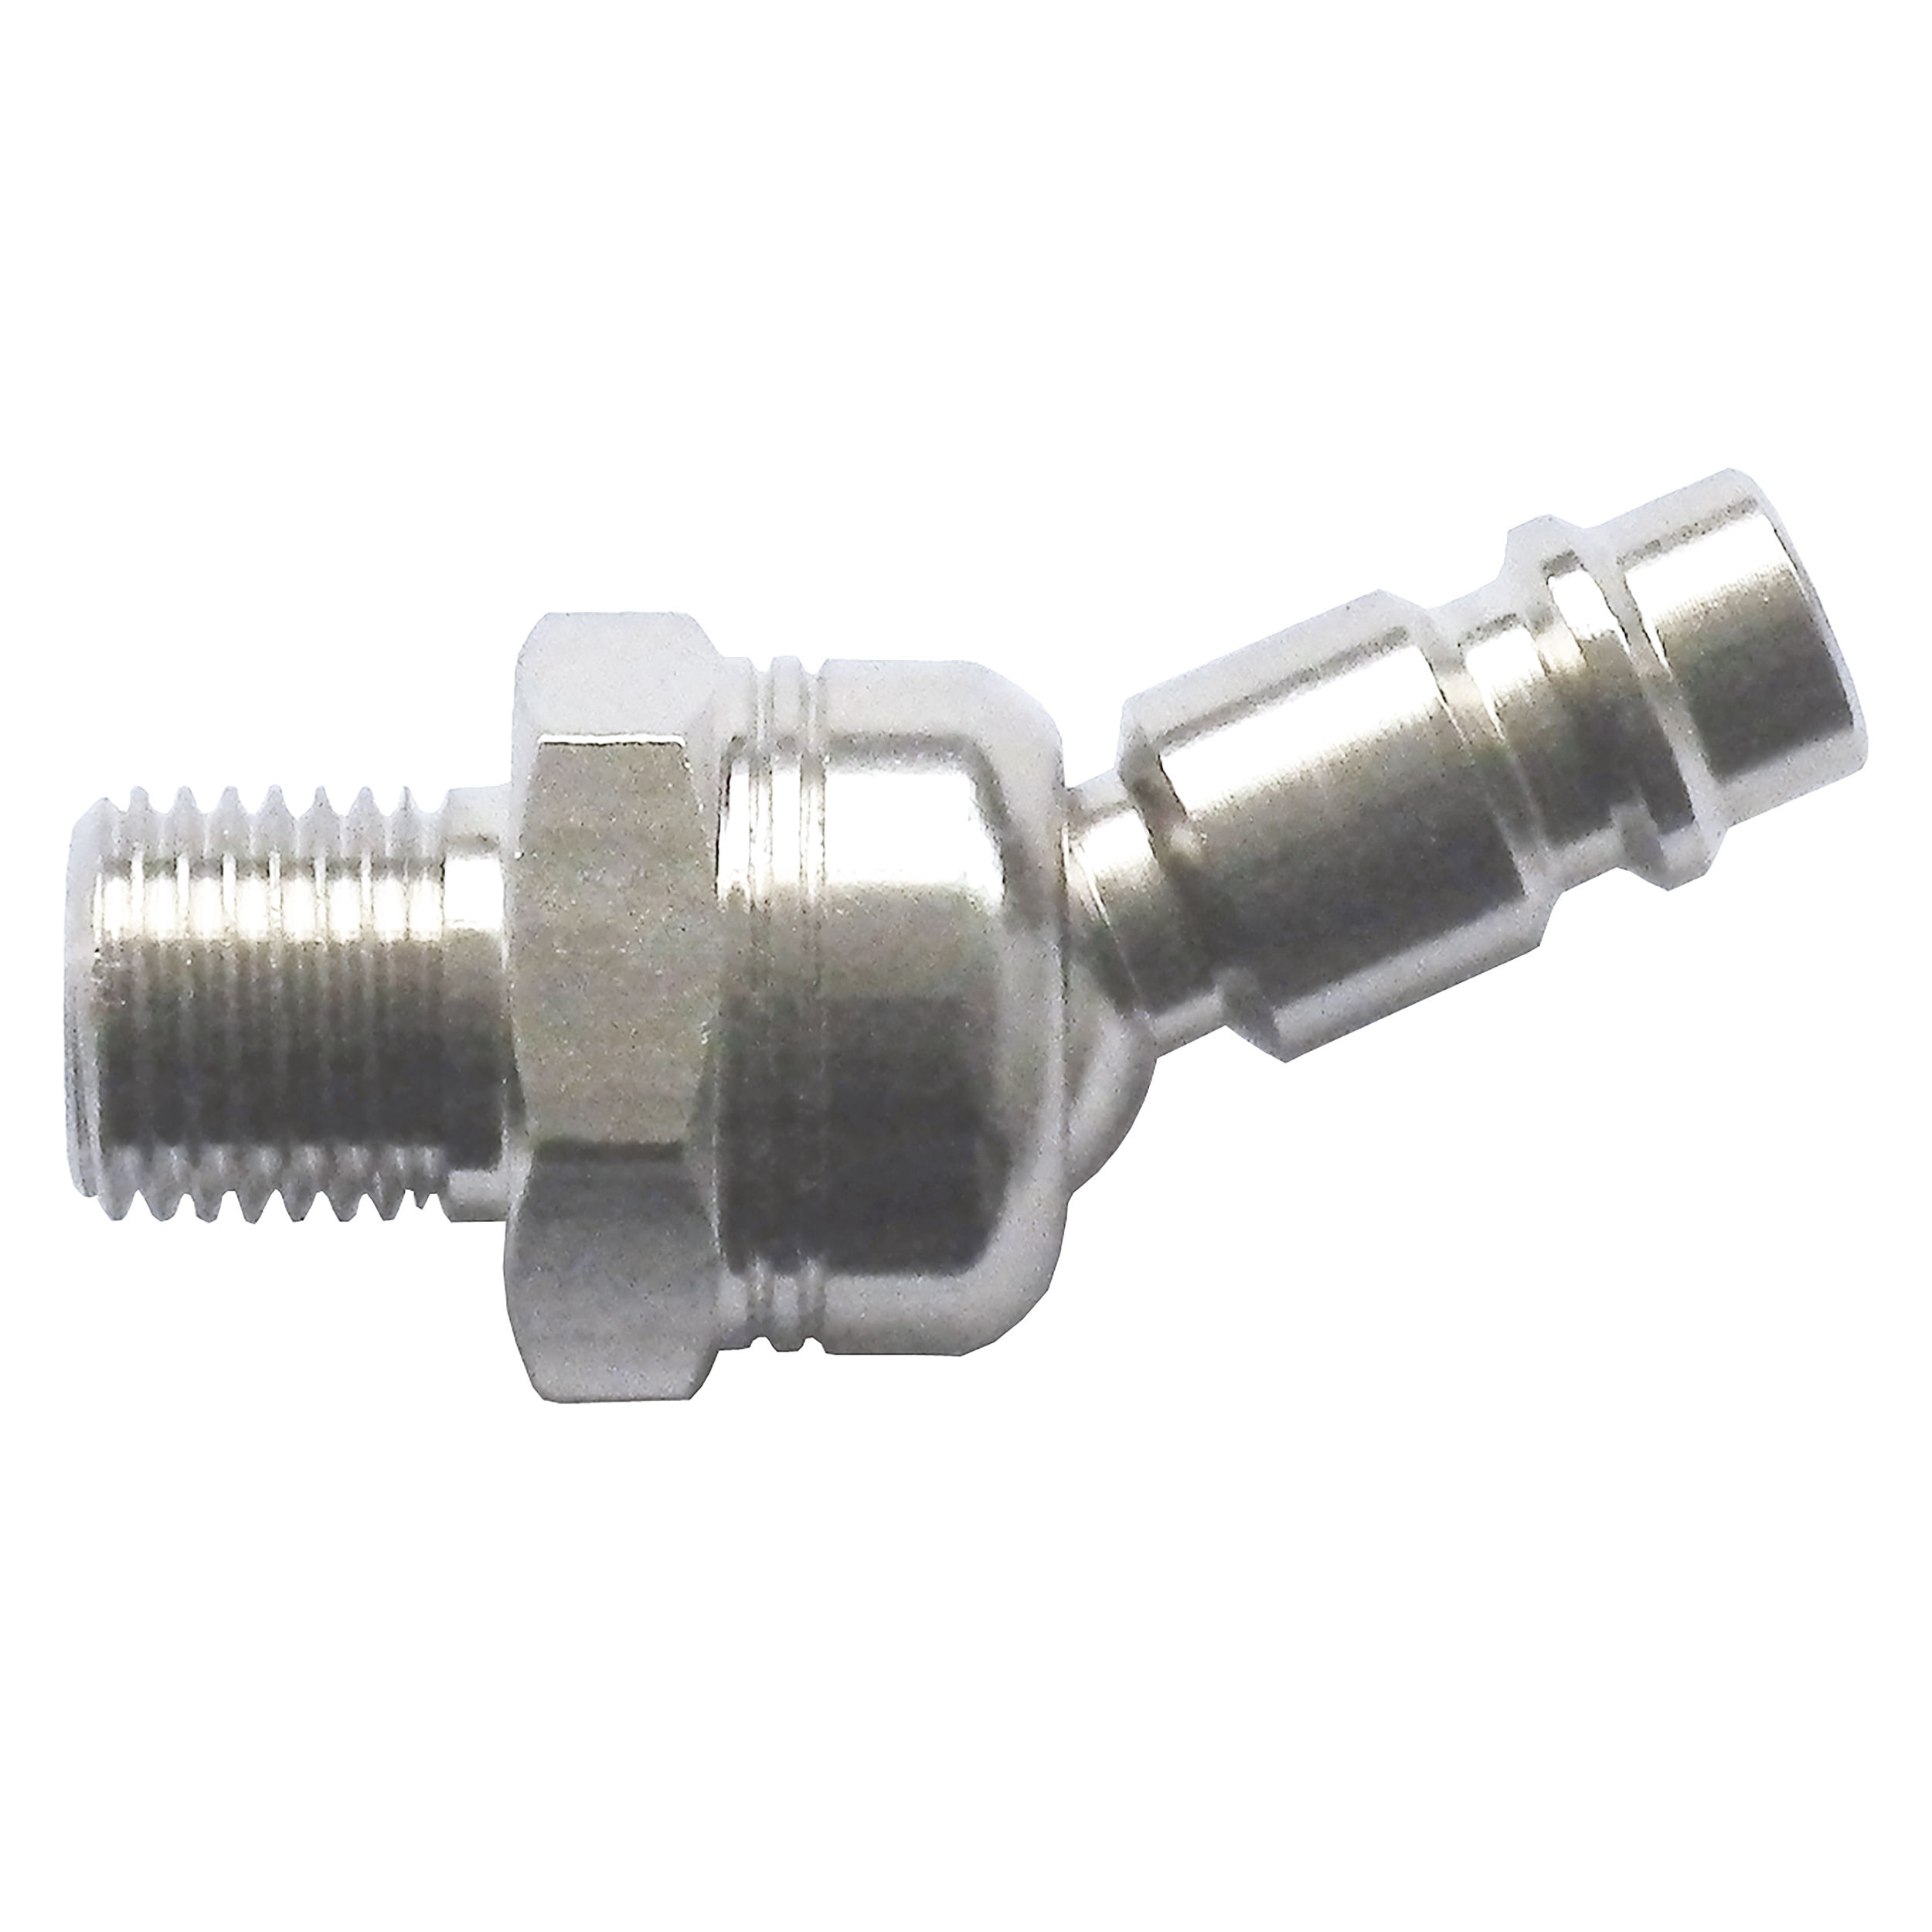 Swivel joint connector DN 7.2, QN 1,000 Nl/min, MOP 362.5 psi, rotation axis 360°, piv. connector 30°, G¼ male, L: 49 mm, AF 21